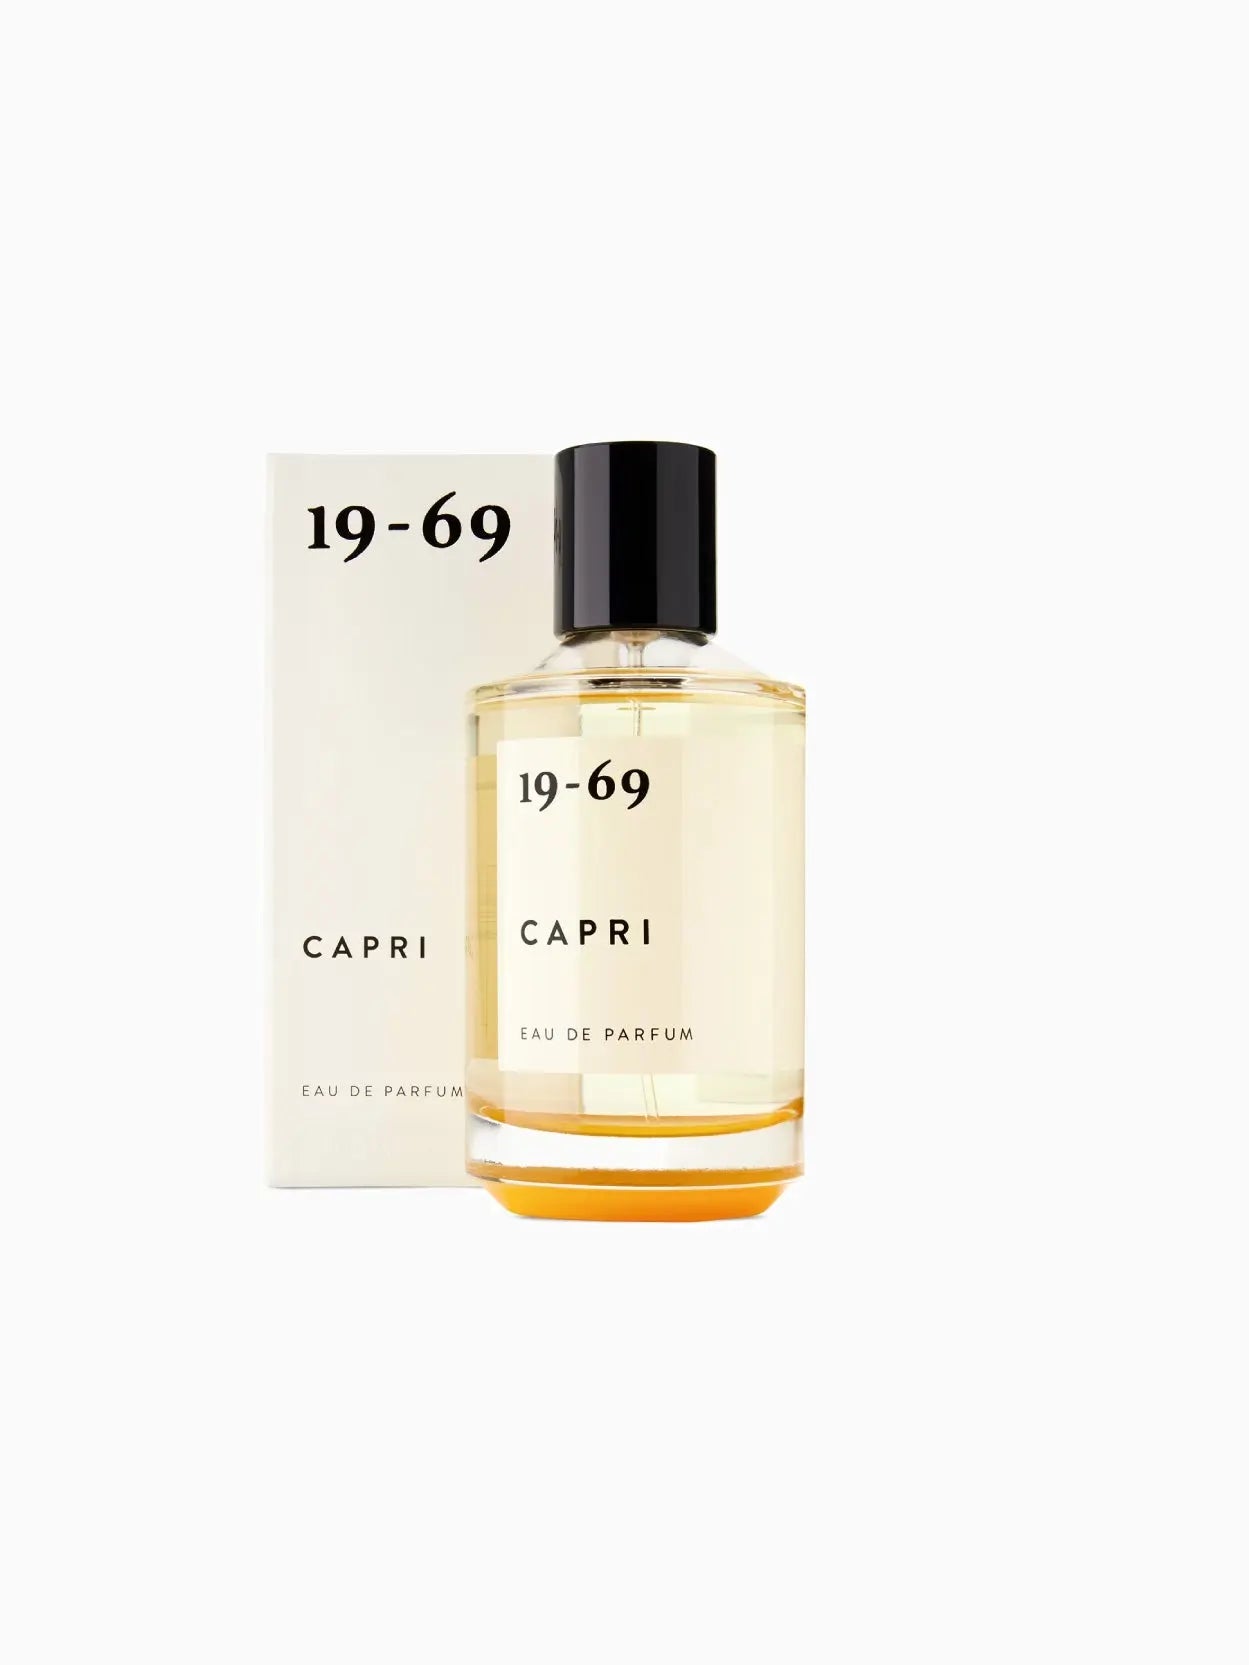 A clear glass bottle of Capri 100ml by 19-69 with a black cap, available at Bassalstore. The fragrance name "Capri 100ml" and "19-69" text is printed on the front in black, showcasing a yellow-tinted liquid inside.